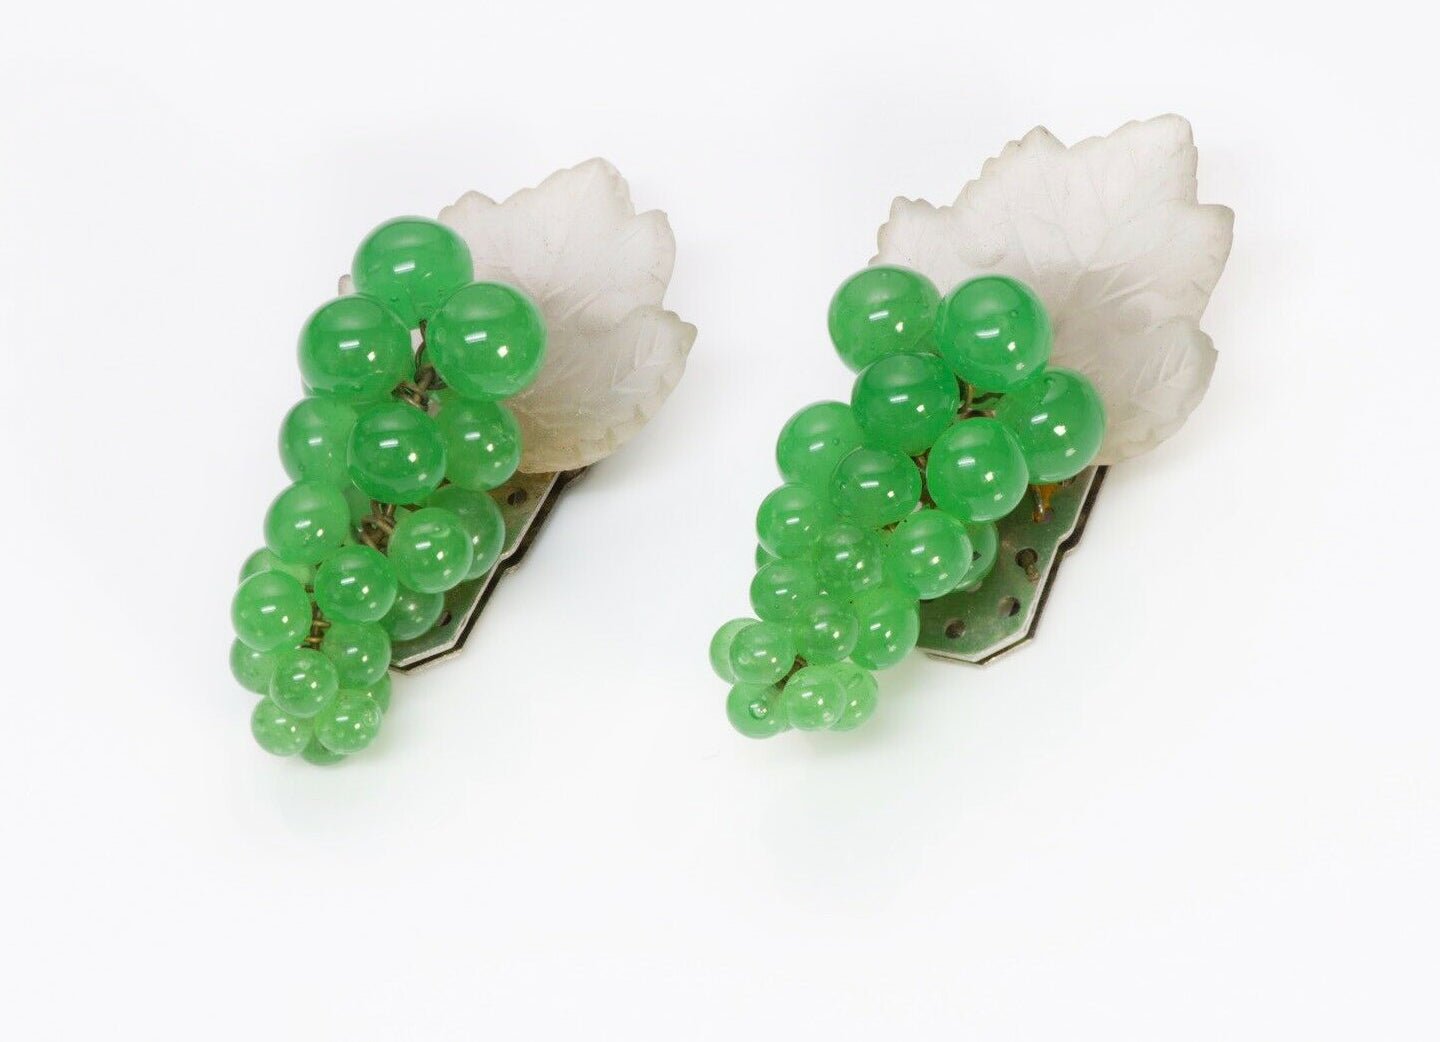 Louis Rousselet 1940’s Green Glass Beads Grape Leaf Double Clips Brooch